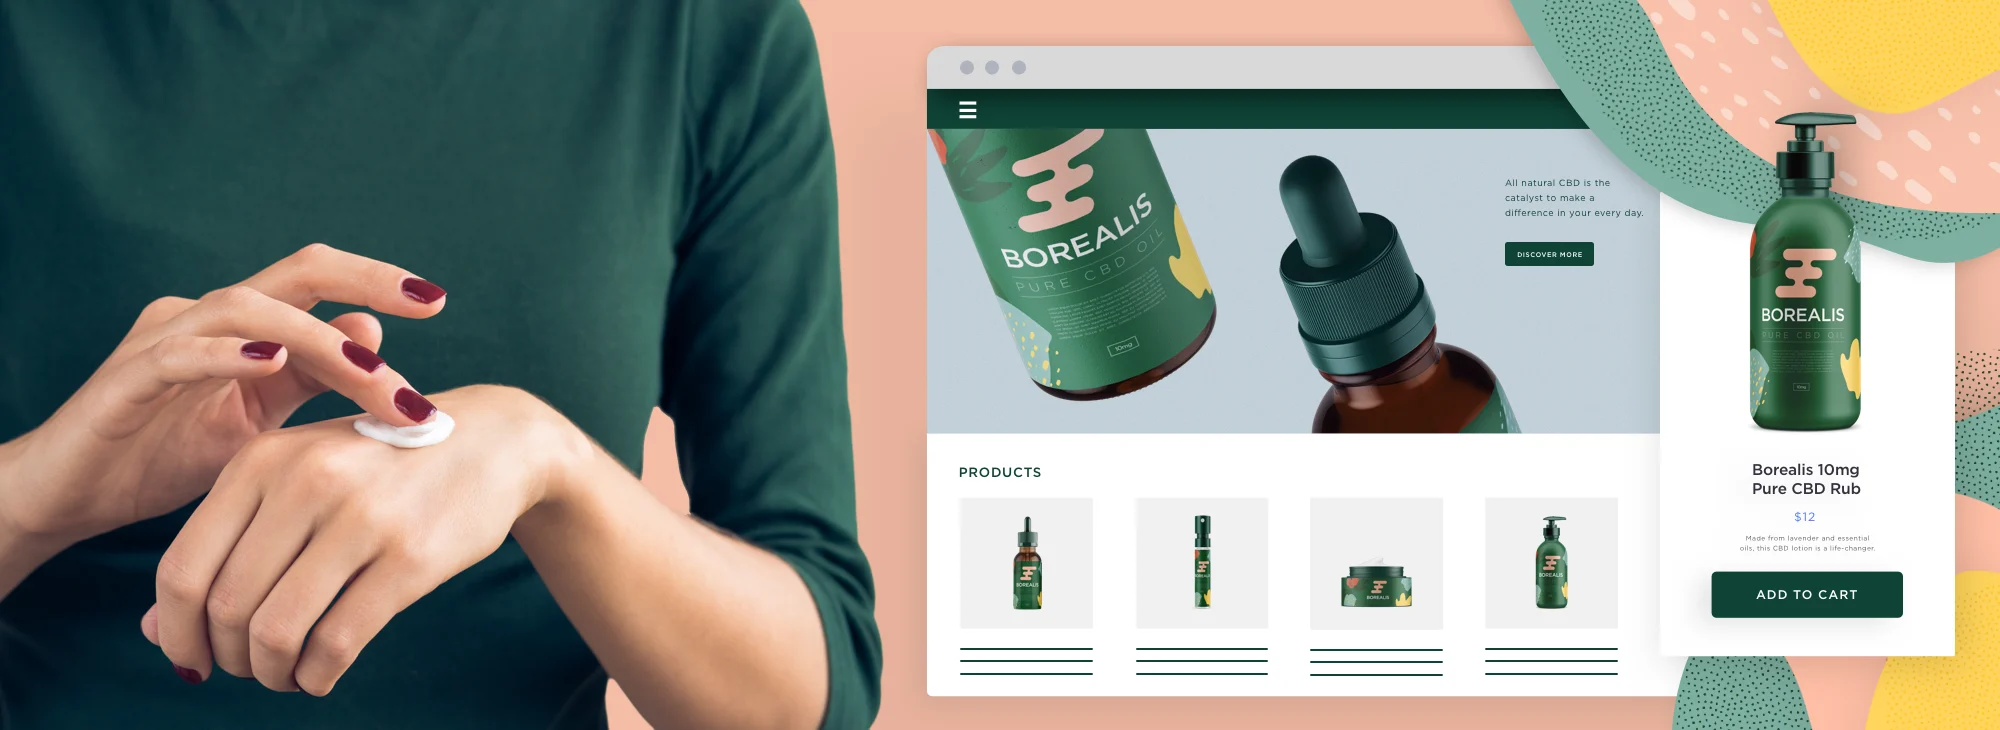 https://cms-wp.bigcommerce.com/wp-content/uploads/2019/08/2019-August-Content-Blog-Headers_Batch-2-1-How-To-Sell-CBD-Online-34CD-MT-@1x.png